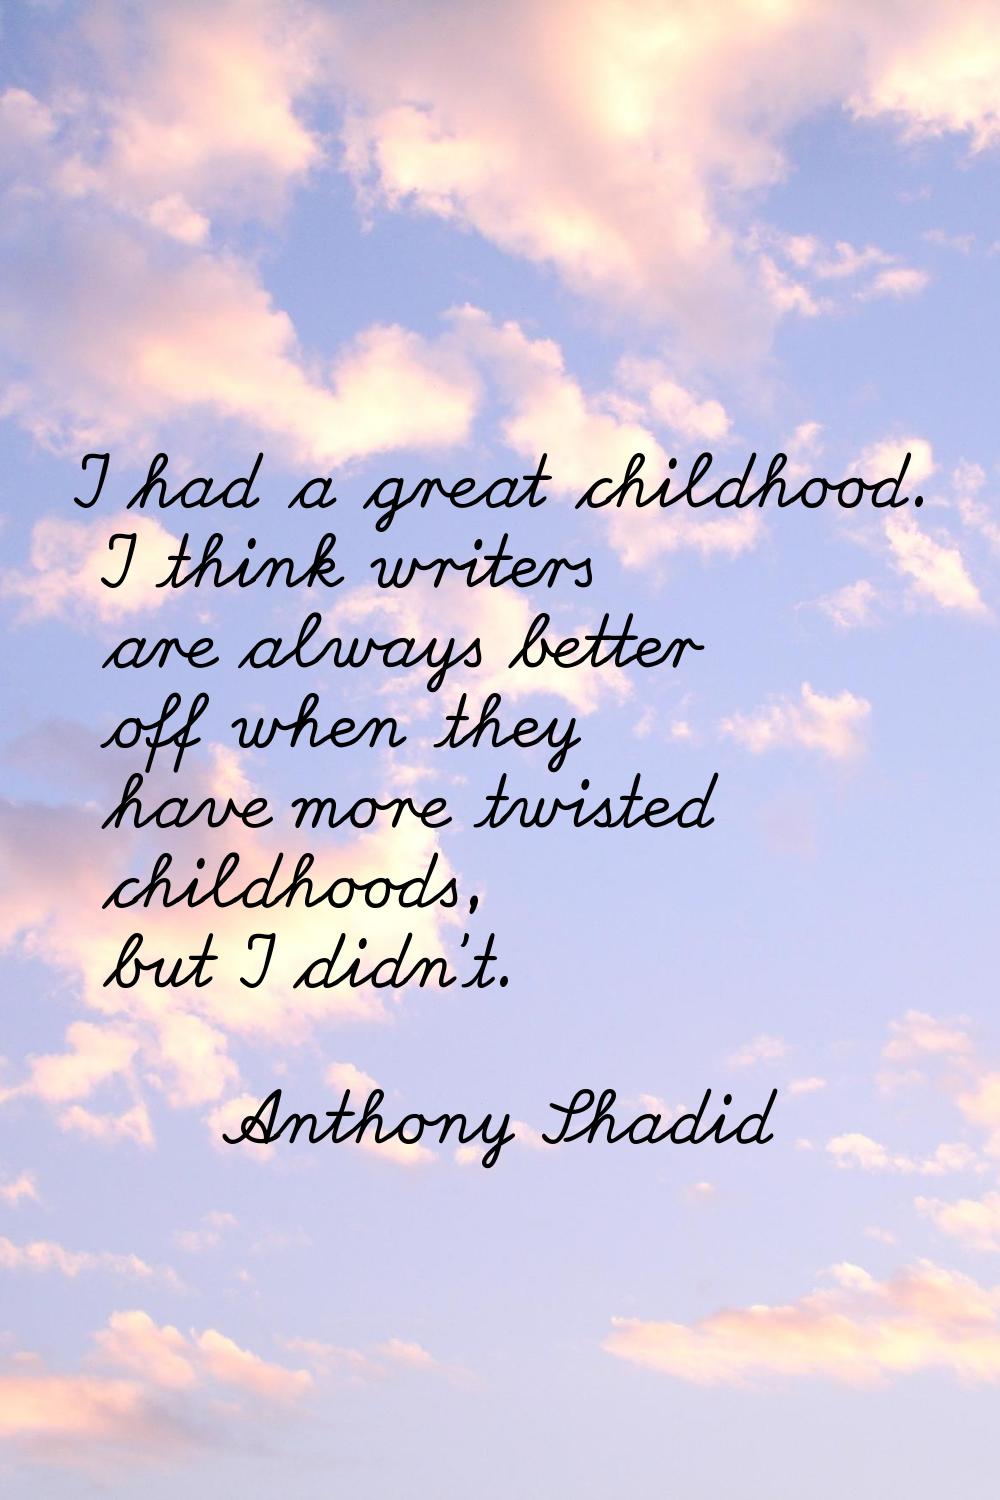 I had a great childhood. I think writers are always better off when they have more twisted childhoo